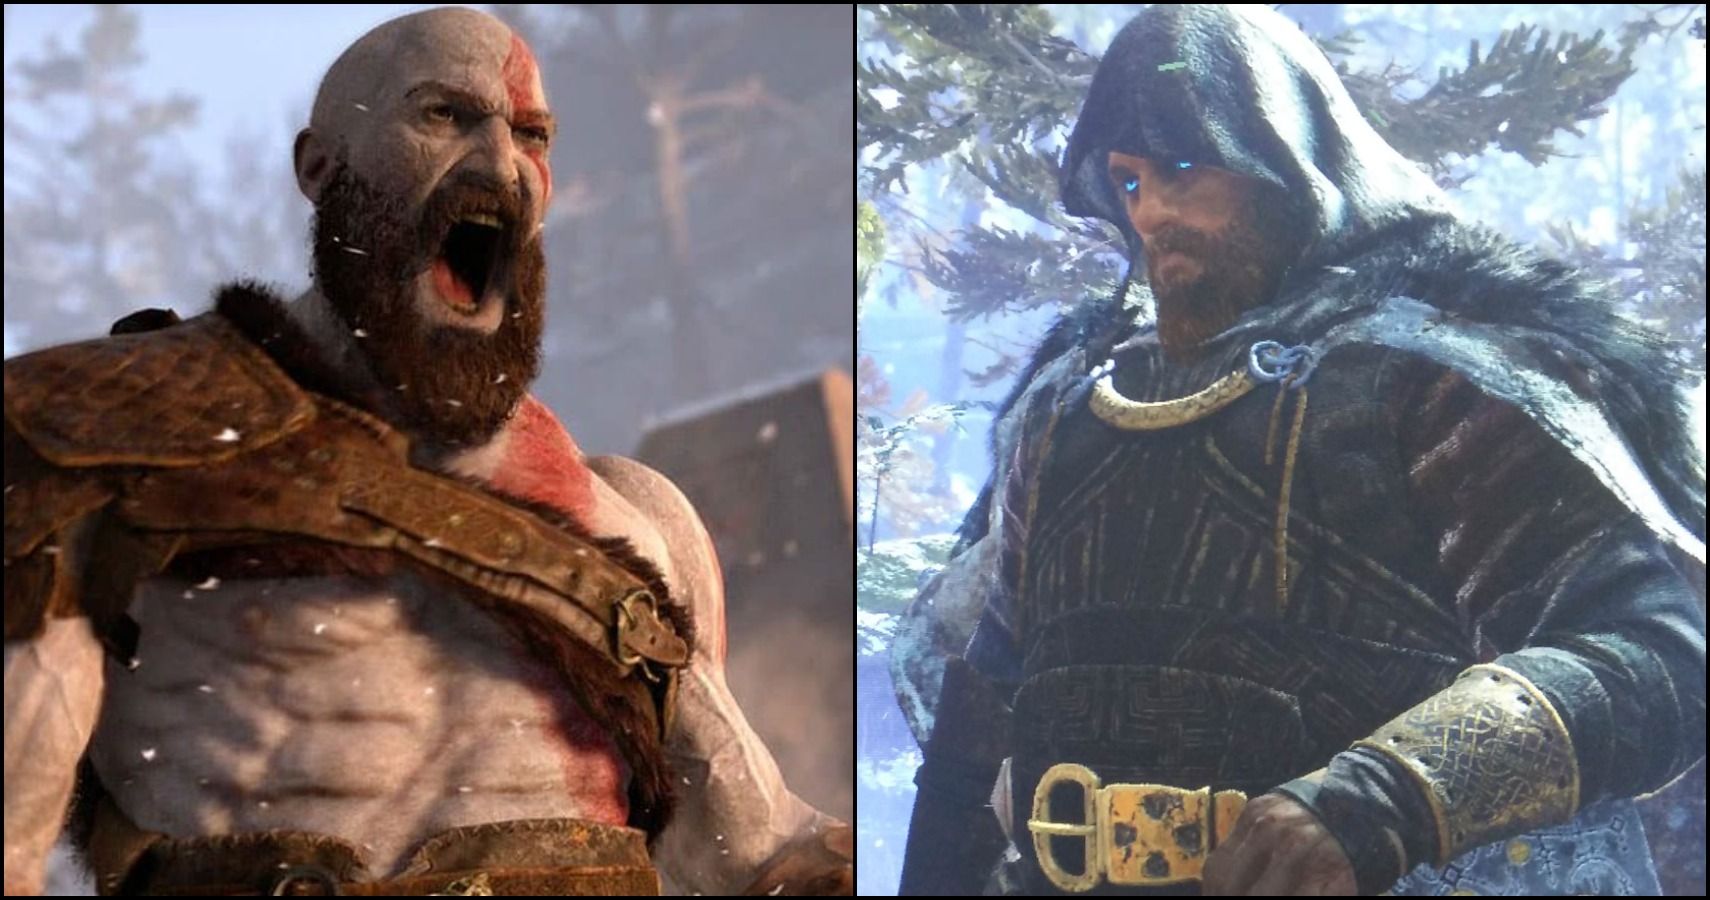 10 Changes God Of War Made From Norse Mythology